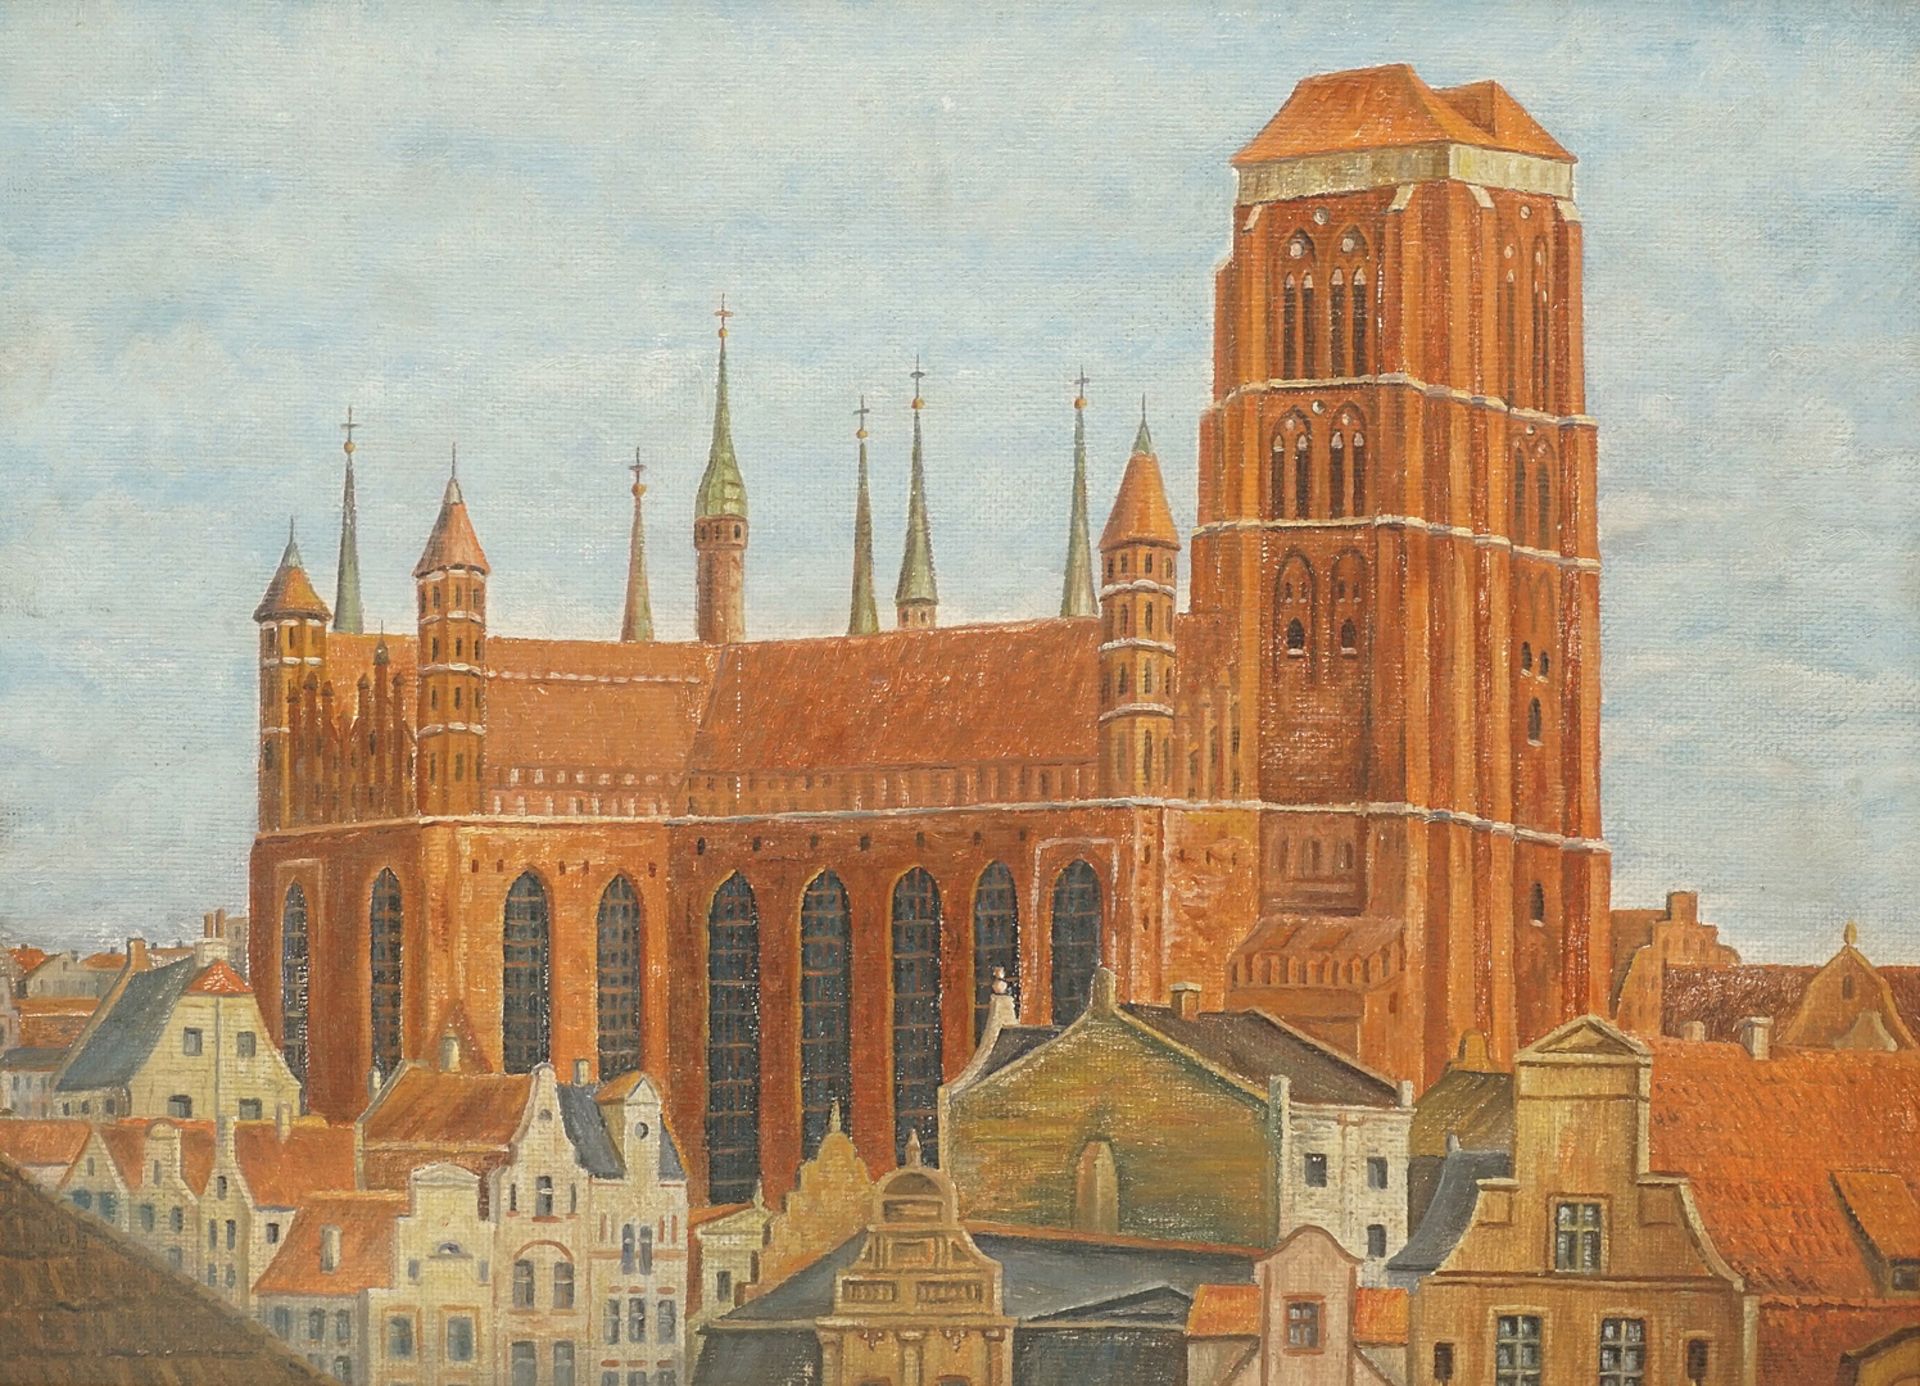 M. Hilse, St. Mary's Church in Gdansk